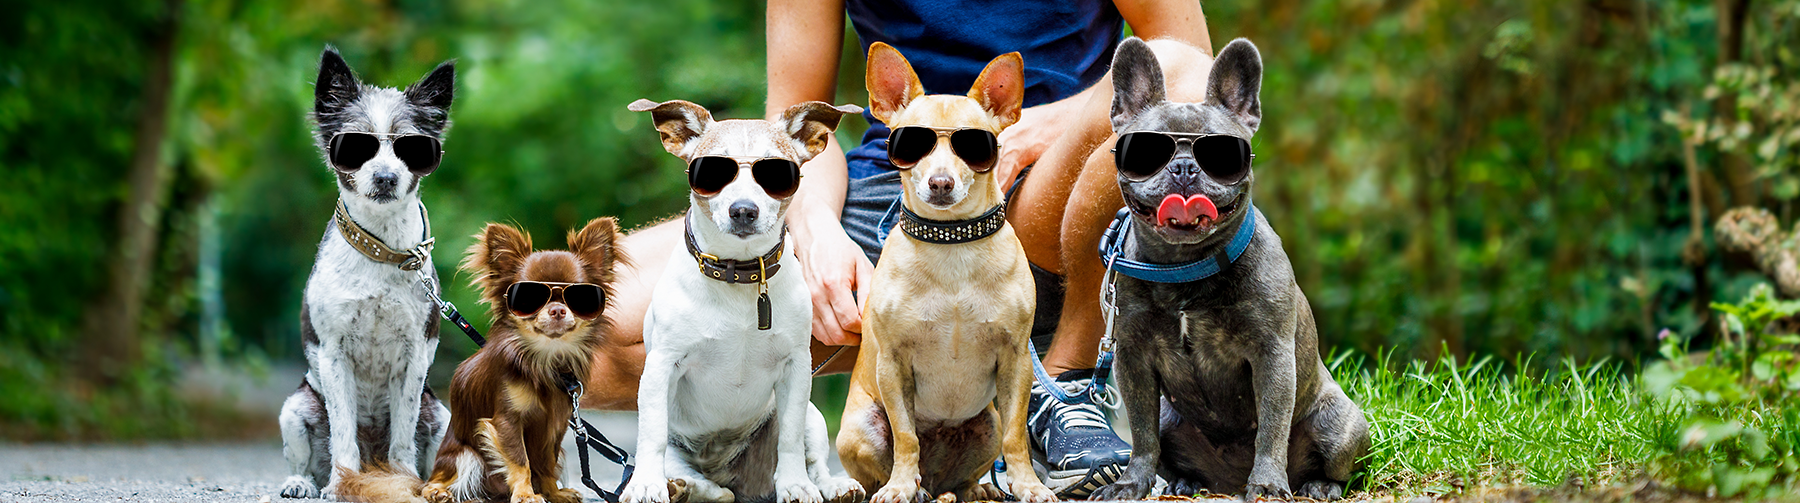 Row of Dogs with Sunglasses